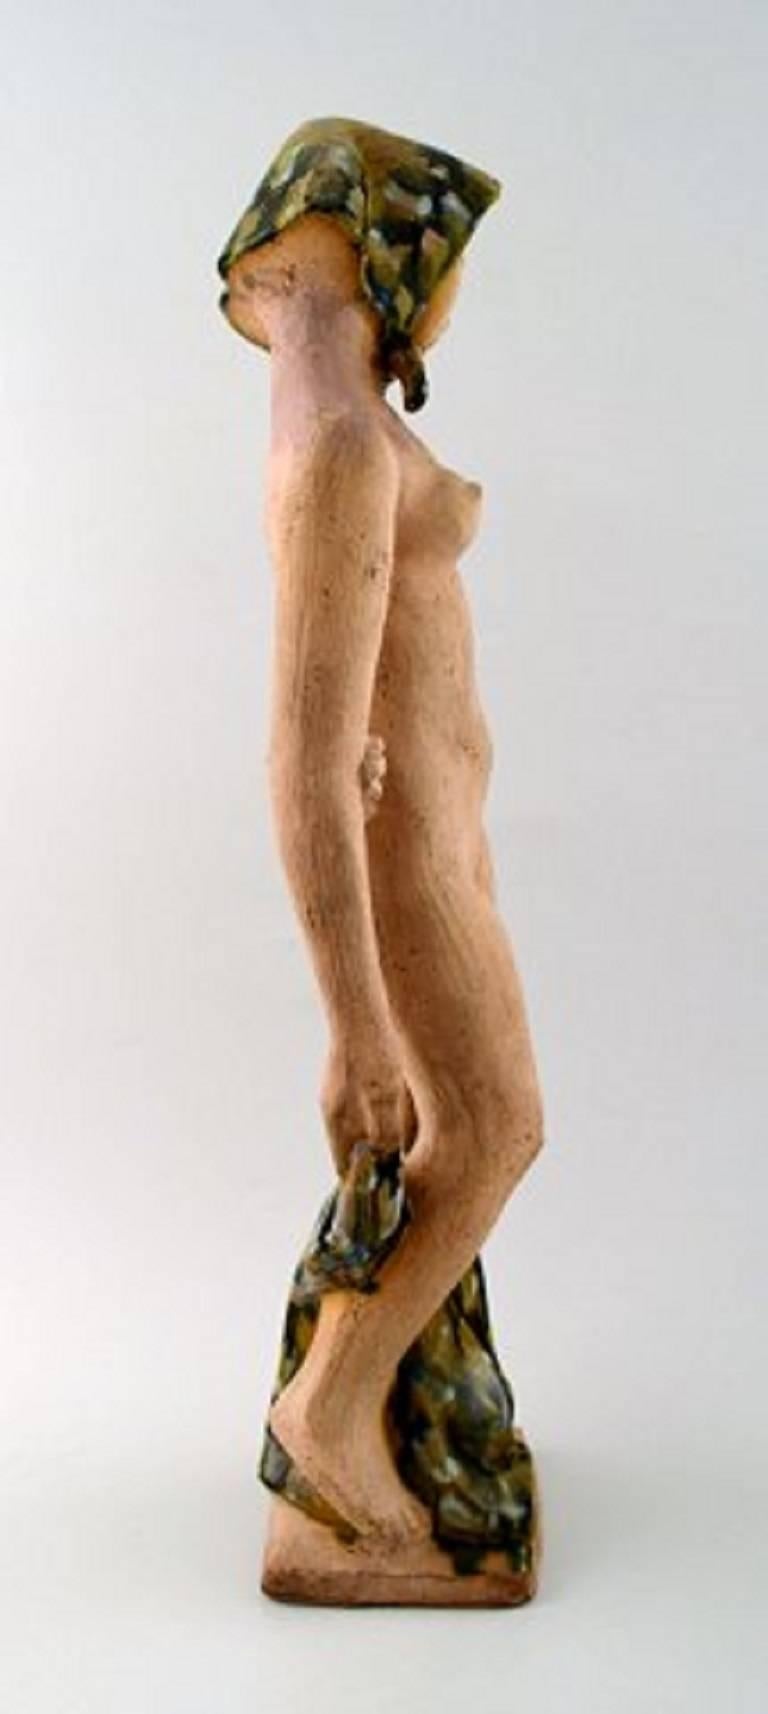 Helge Christoffersen, own workshop, very large unique figure of nude young model wearing scarf.
High quality ceramic sculpture, beautiful glaze.
Measures 50 x 11 cm.
In perfect condition.
Signed.